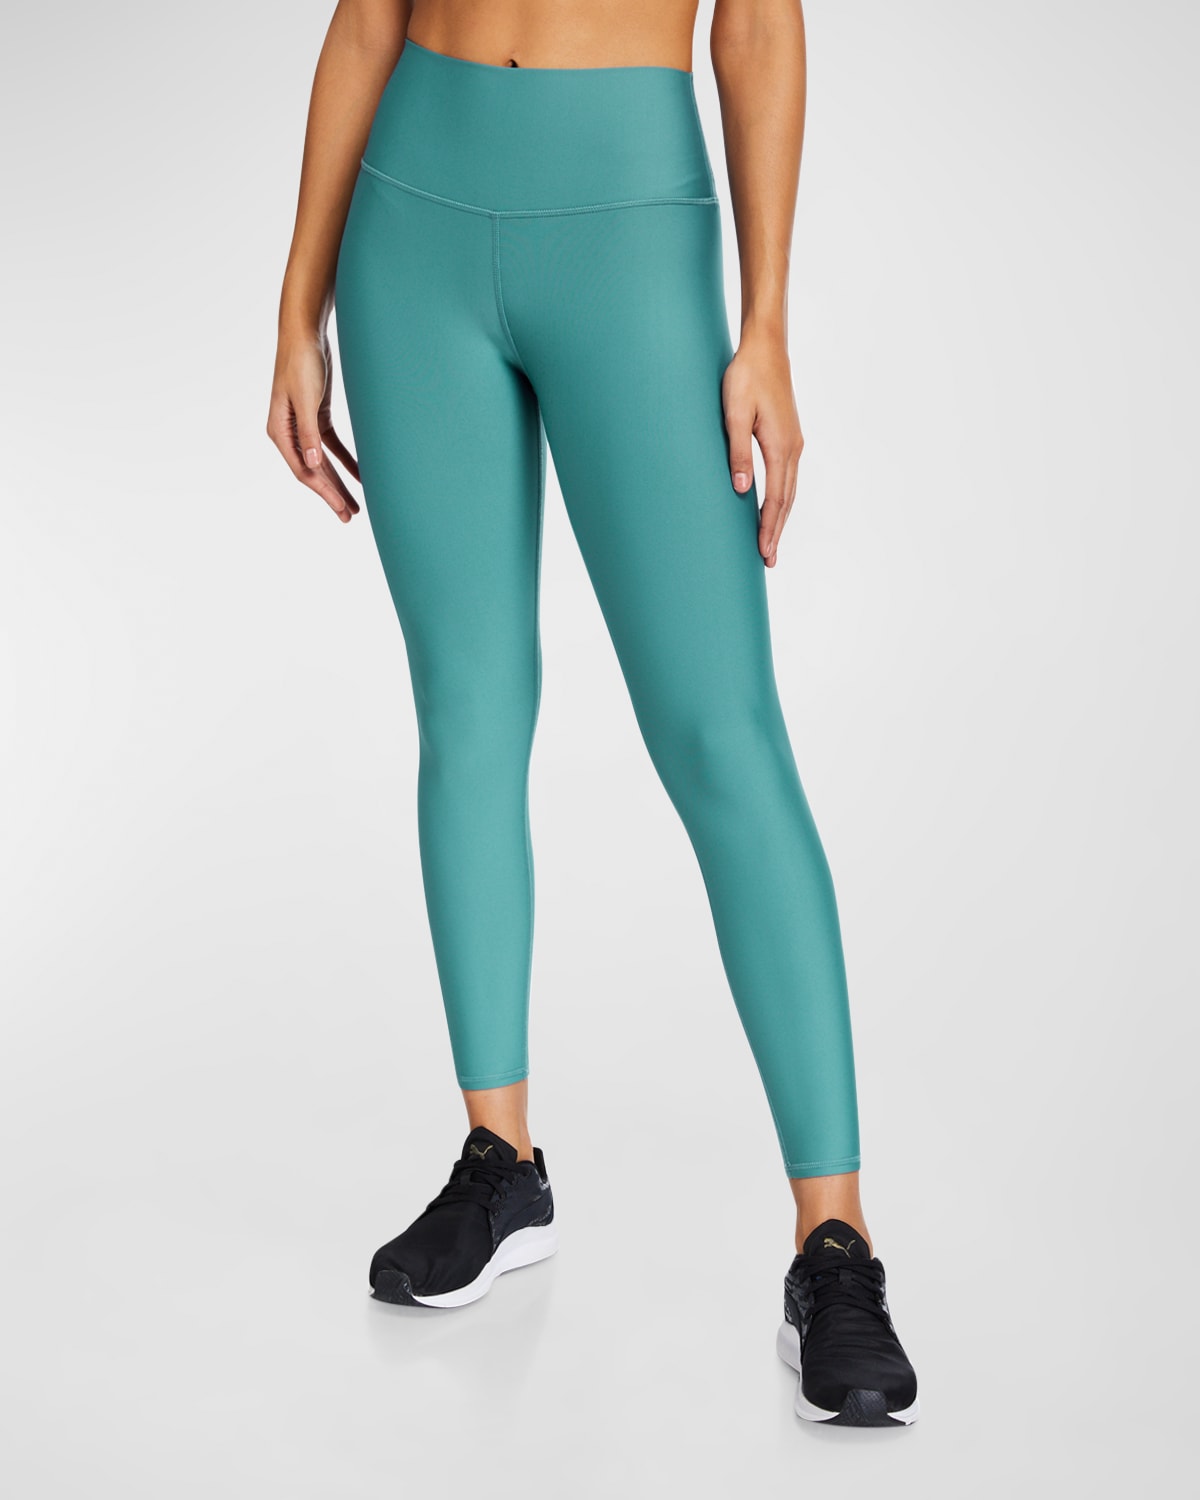 High-Waist Airlift Short in Ocean Teal by Alo Yoga